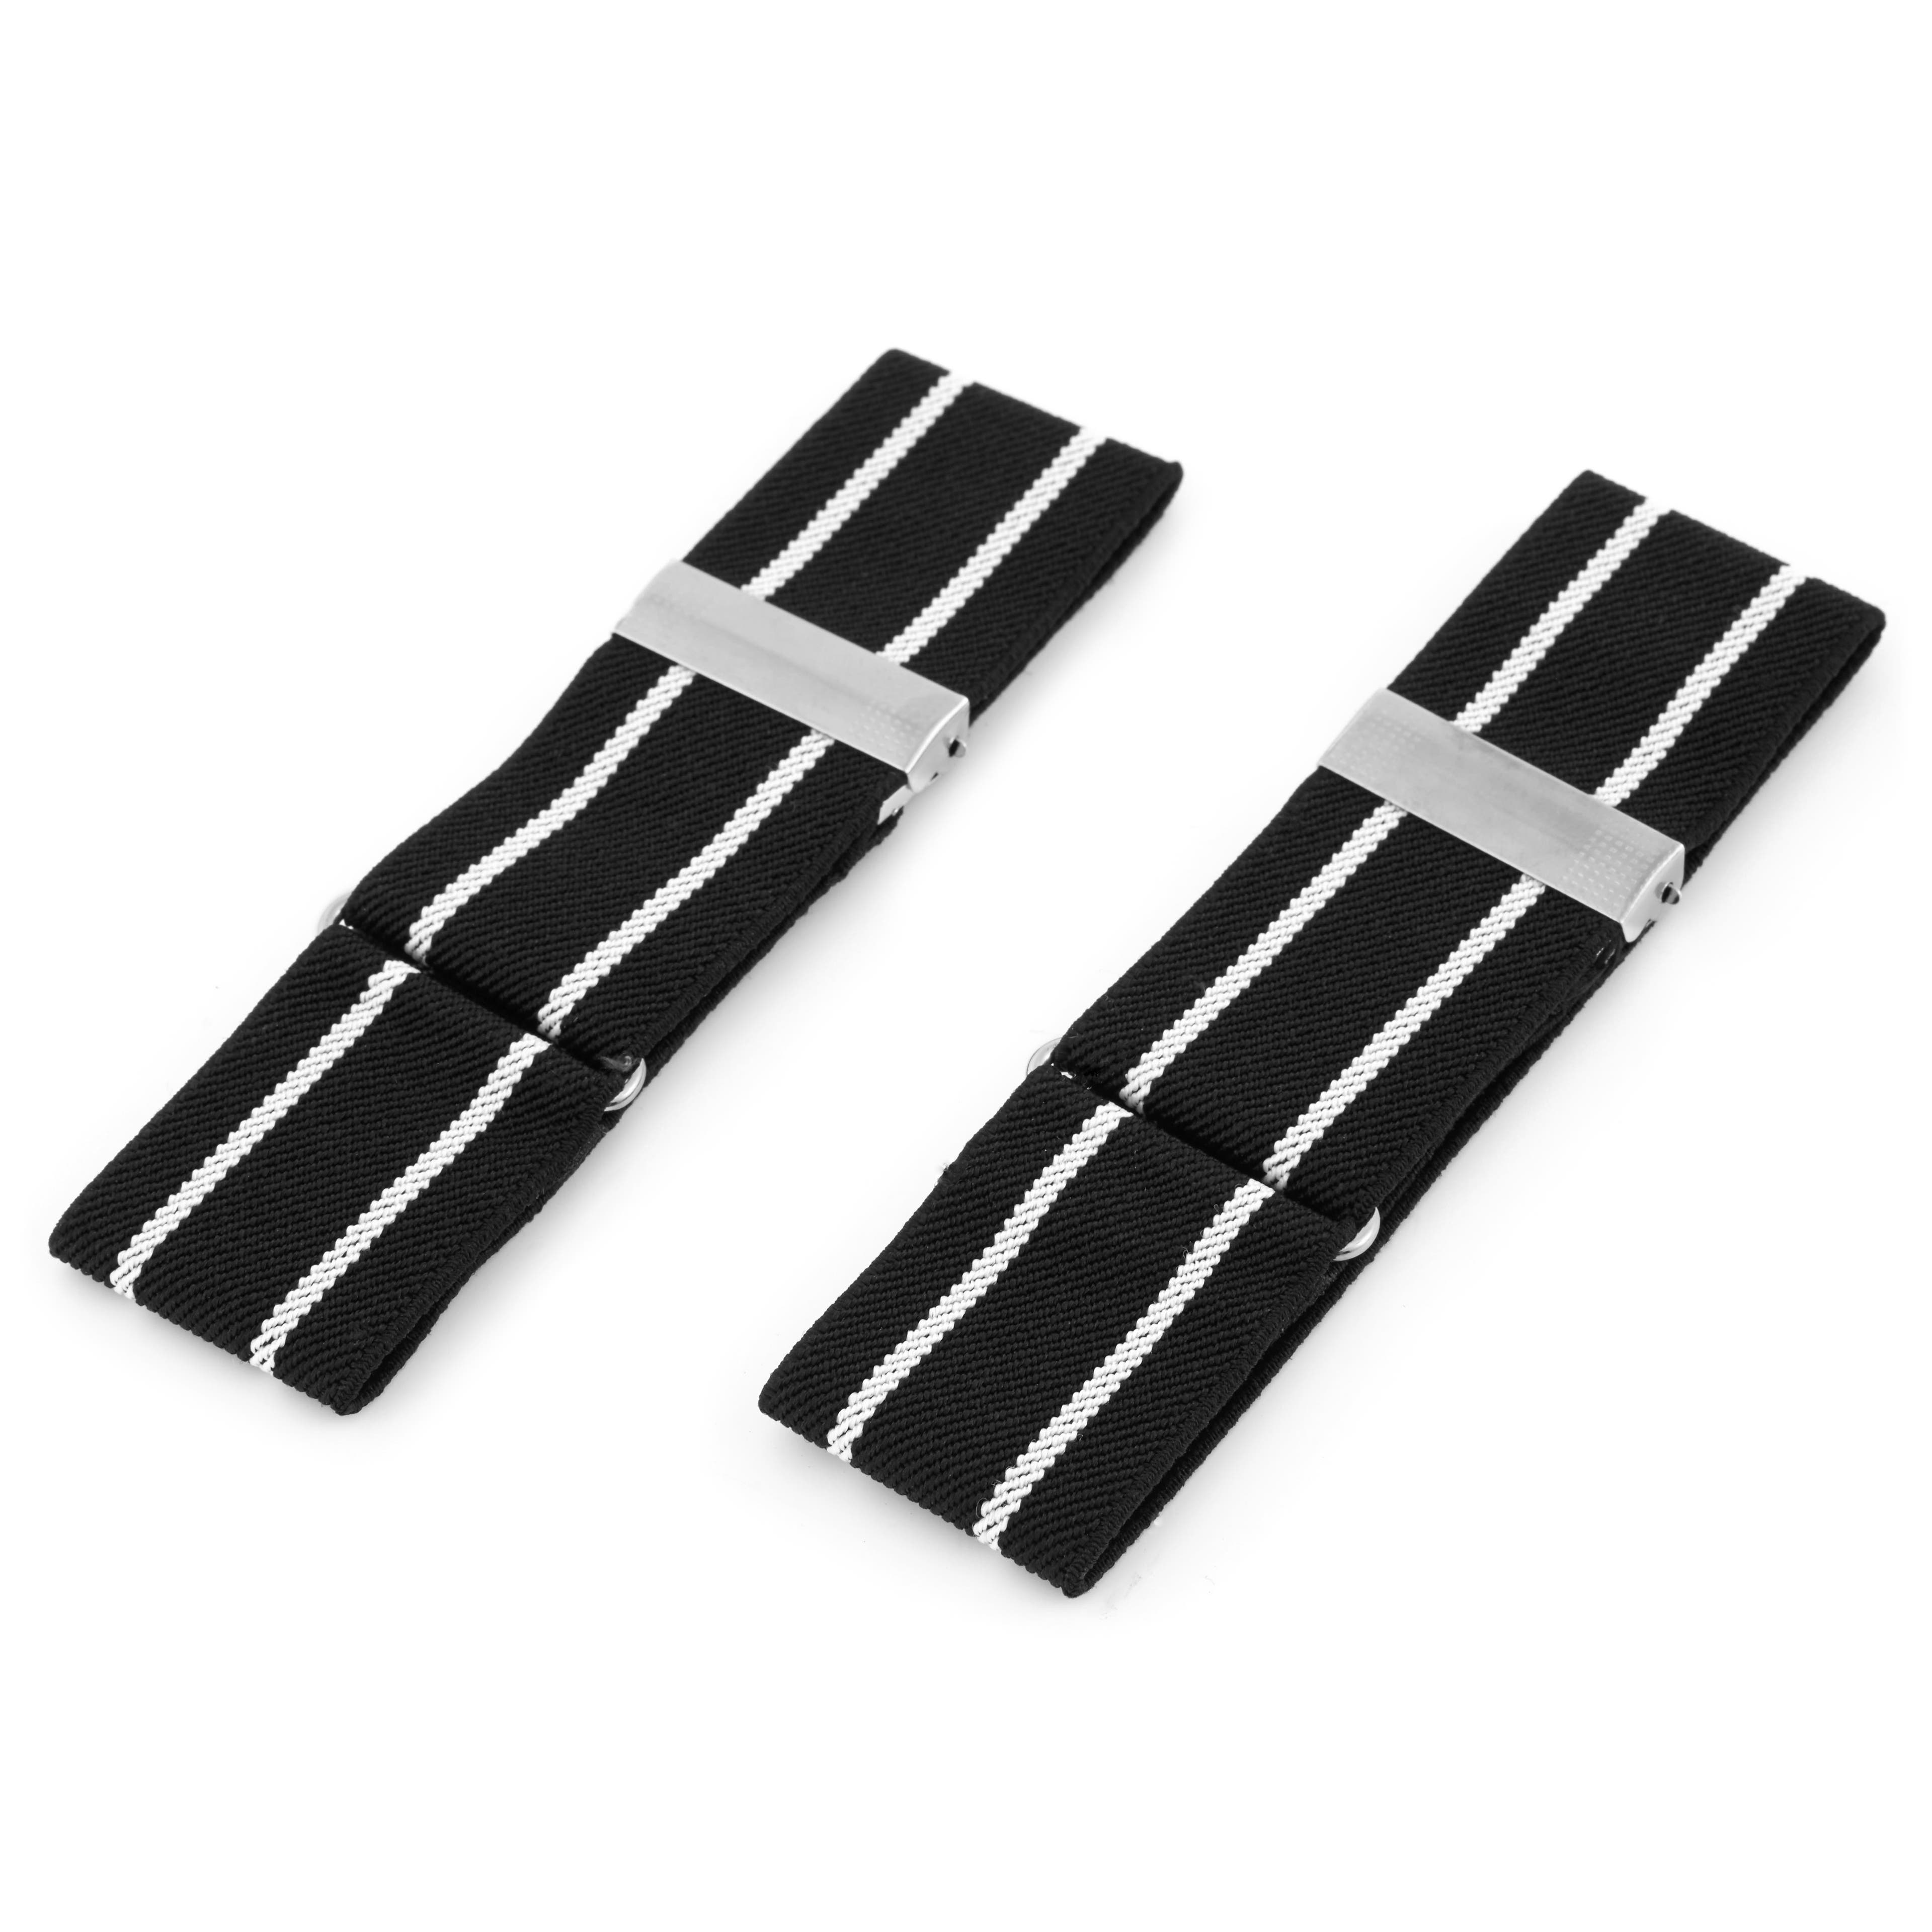 Black and White Striped Sleeve Garters